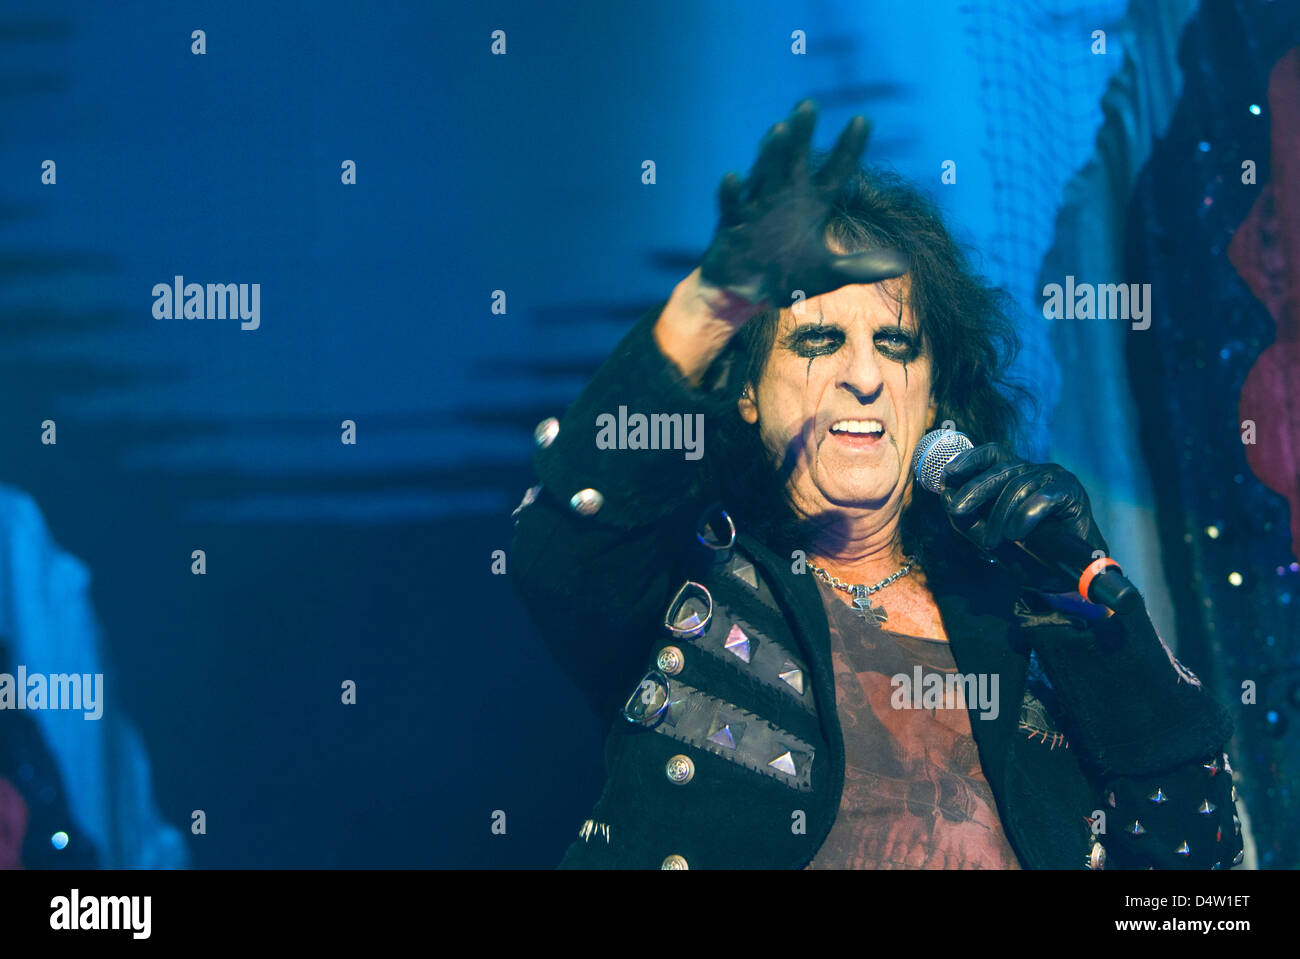 US hard rock legend Alice Cooper performs in Schwerin, Germany, 09 December 2009. The inventor of shock rock currently tours Europe with the 'Theatre of Death Tour', Schwerin is the tour's only Germany stop. Photo: Jens Buettner Stock Photo